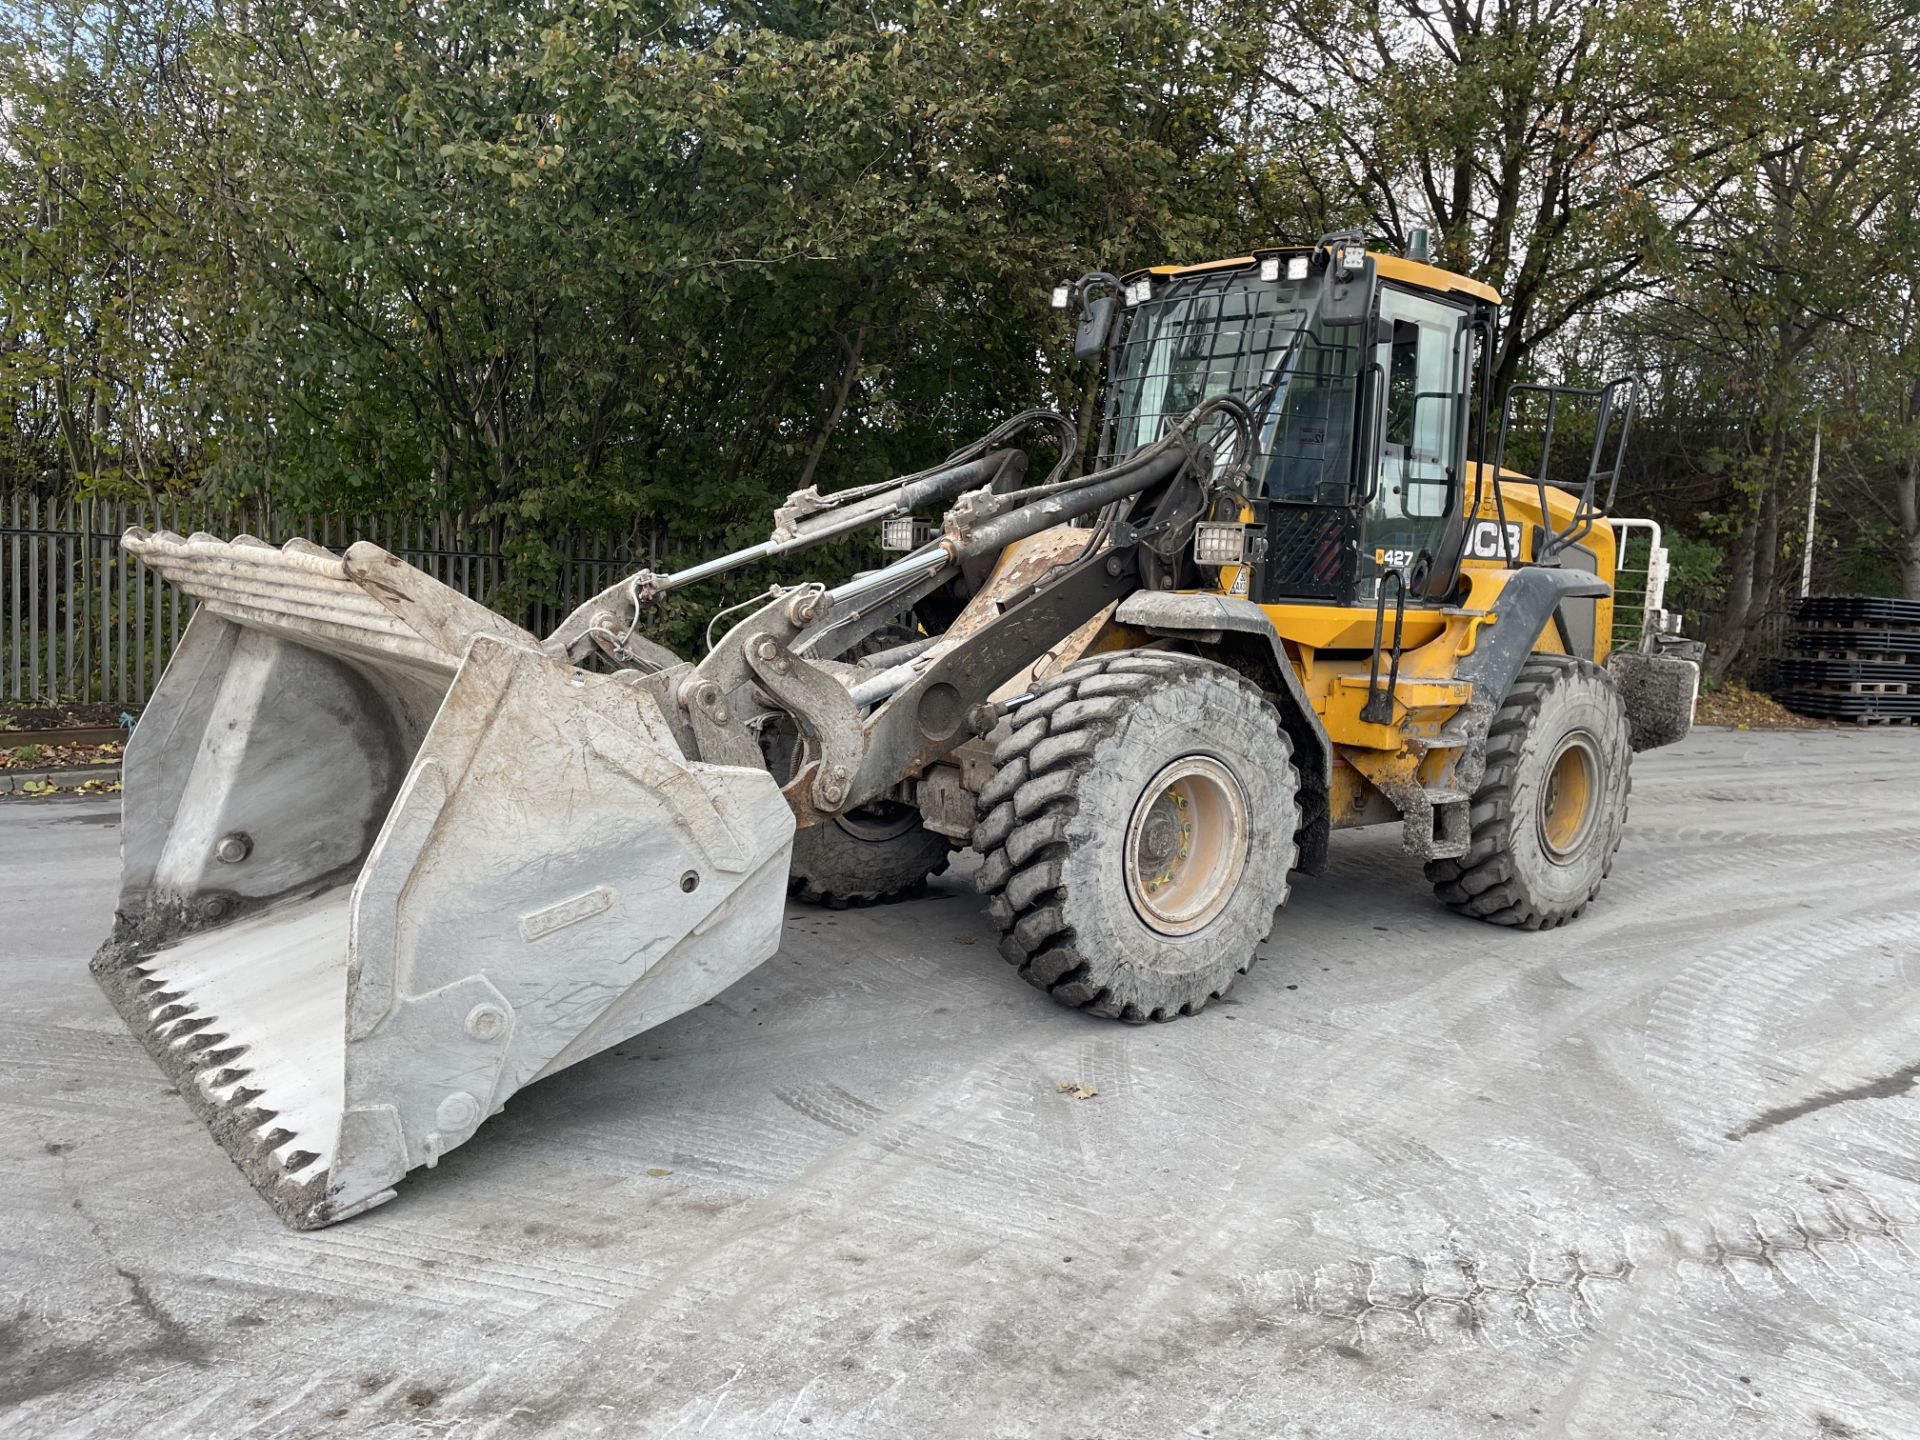 JCB, Wastemaster 427 S5, wheel loader, PIN: JCB4A5A9VK2679908 (2019), Last known Hours 3775.8, - Image 24 of 24